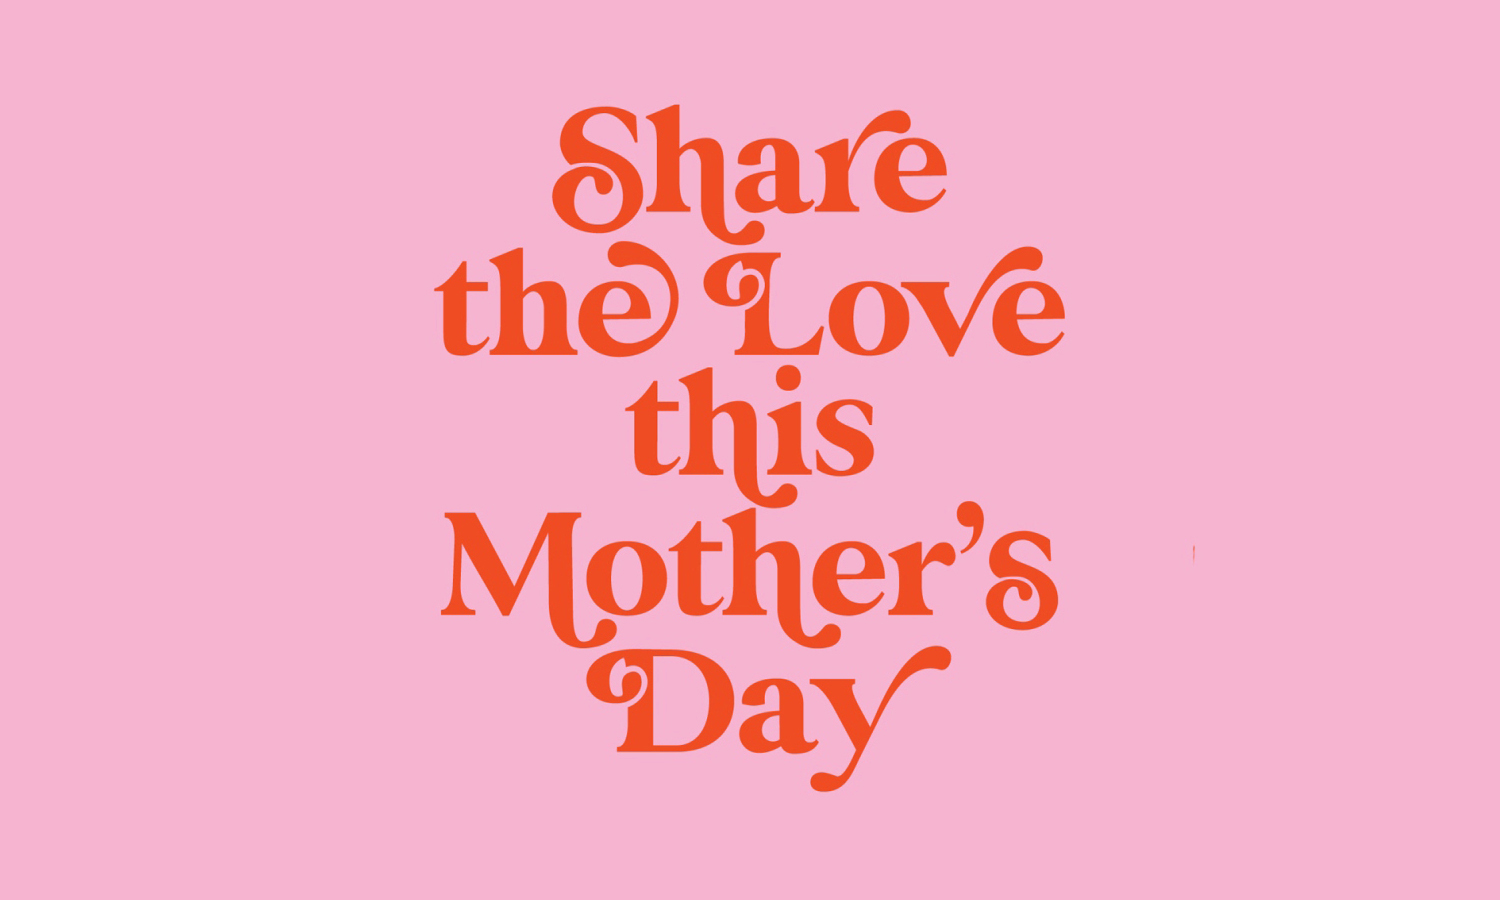 Share the Love this Mother’s Day